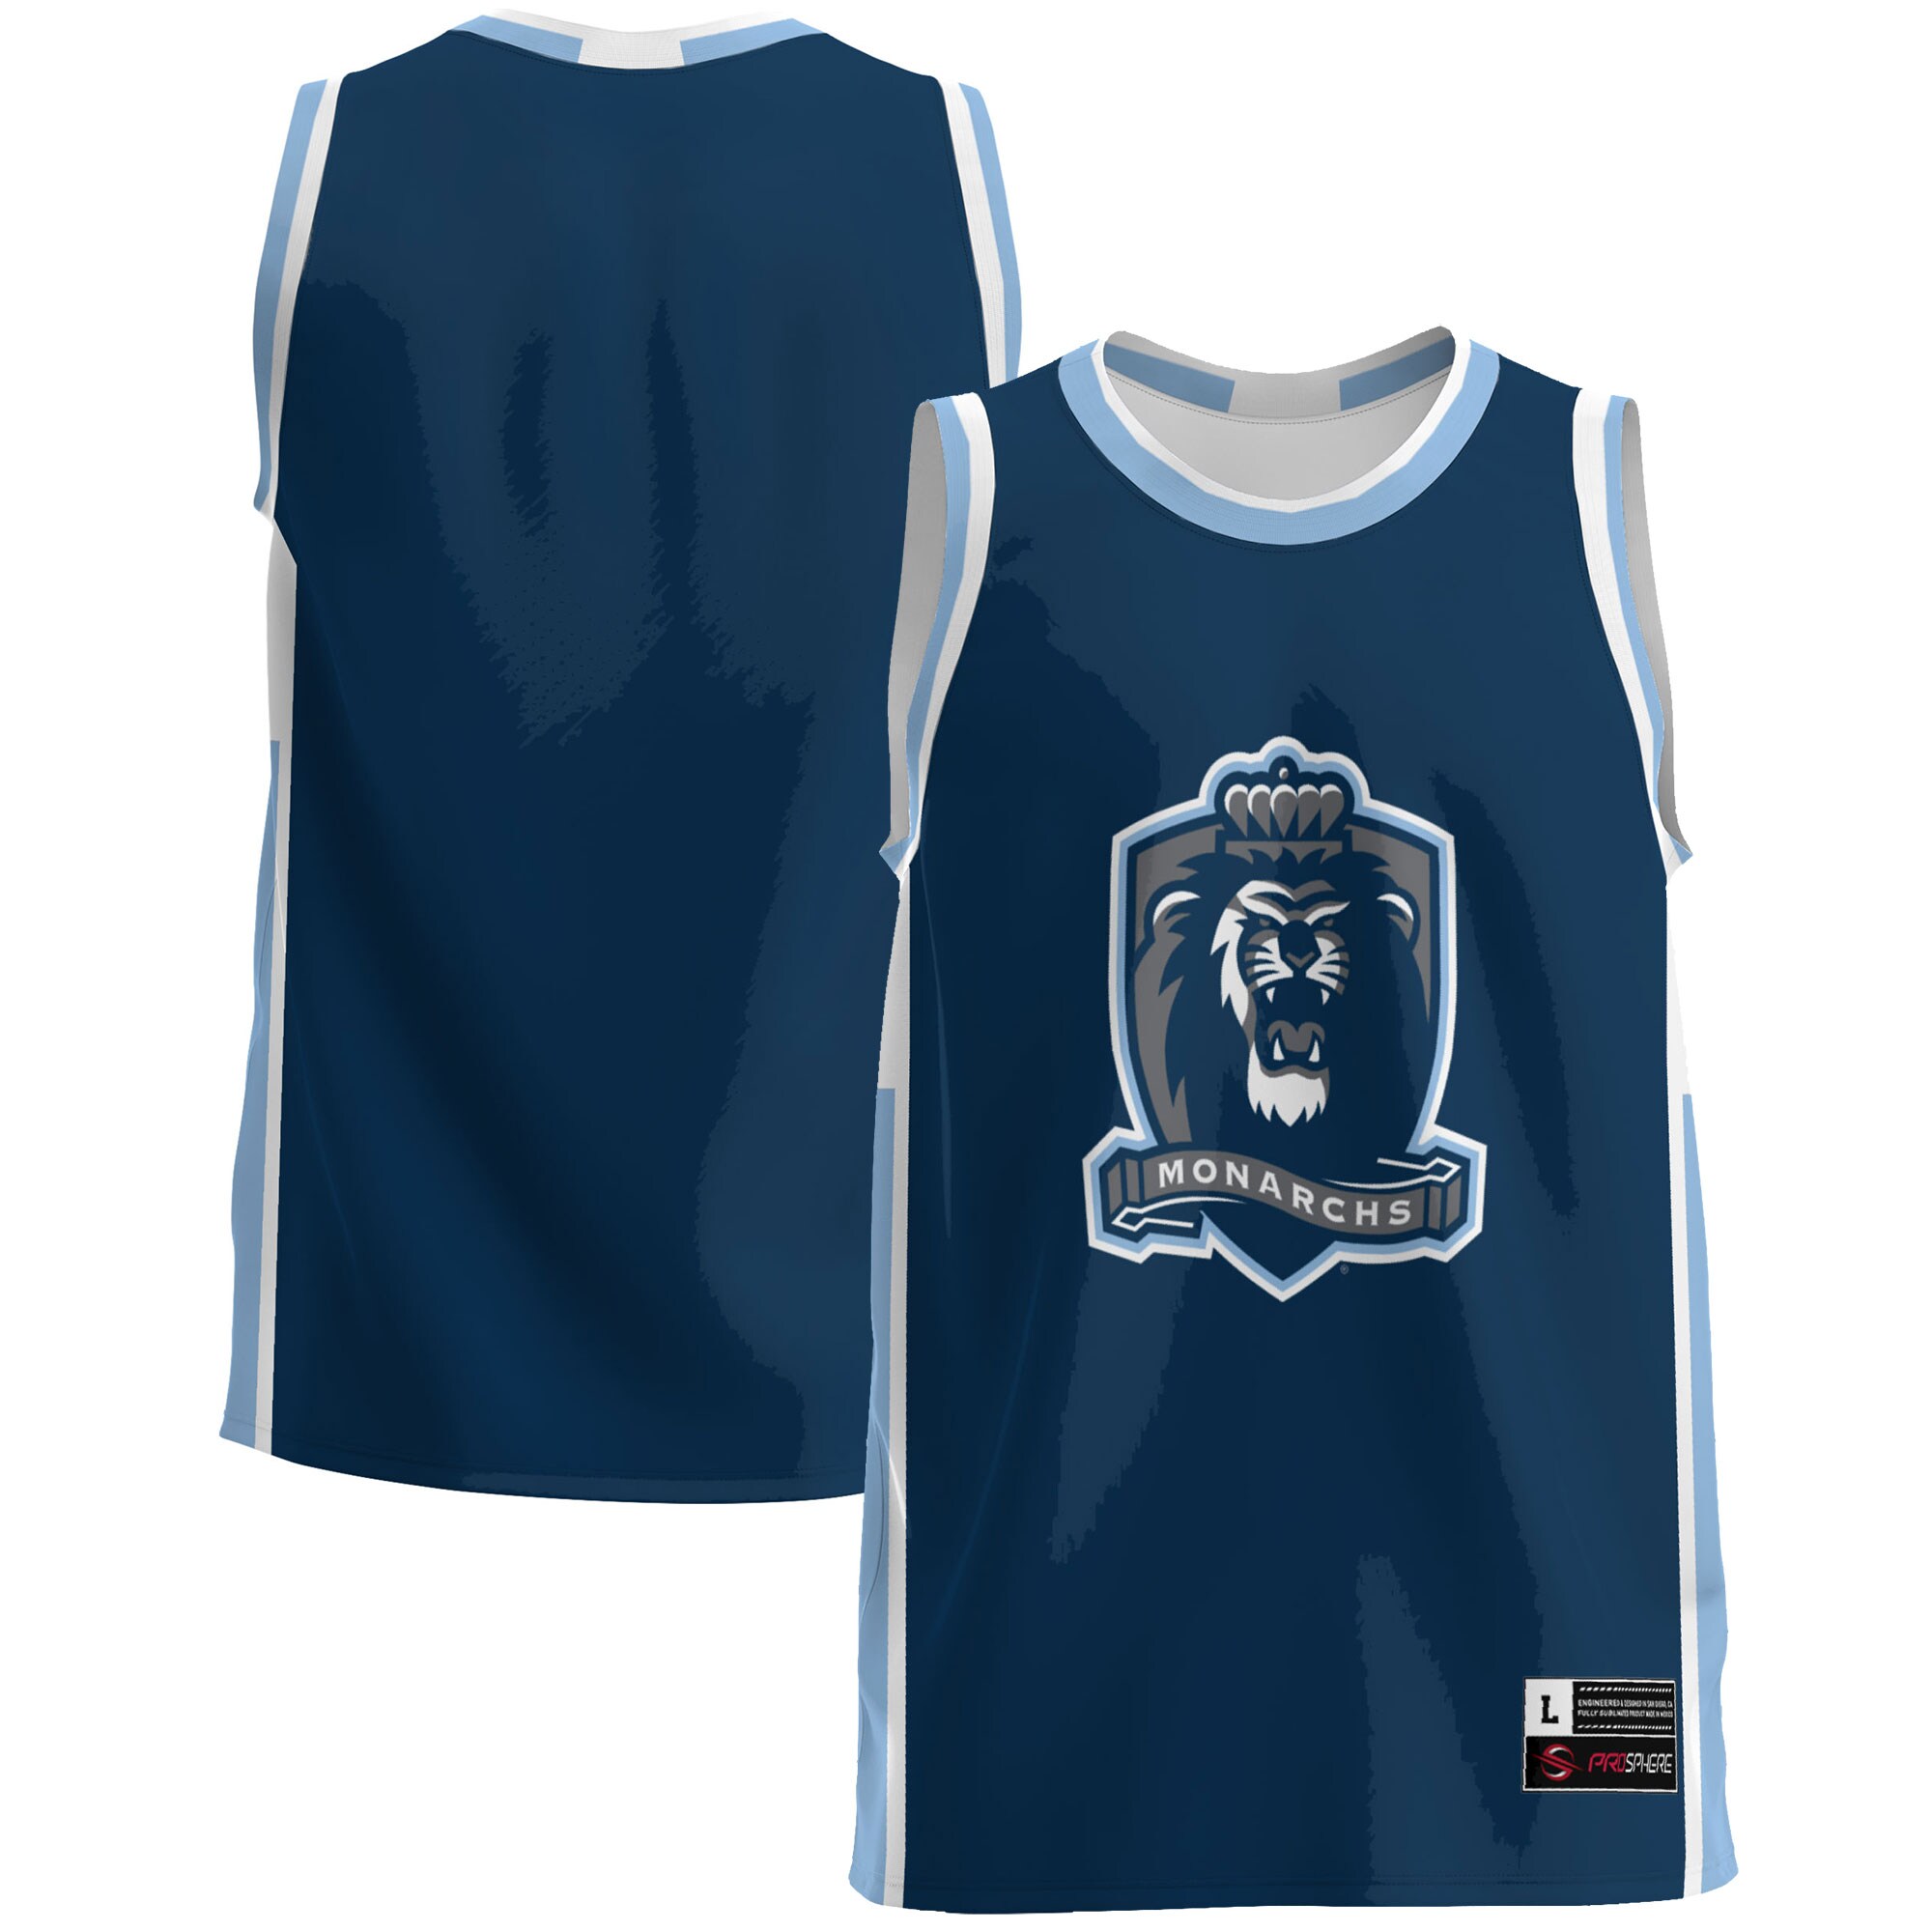 Old Dominion Monarchs Basketball Jersey - Blue For Youth Women Men